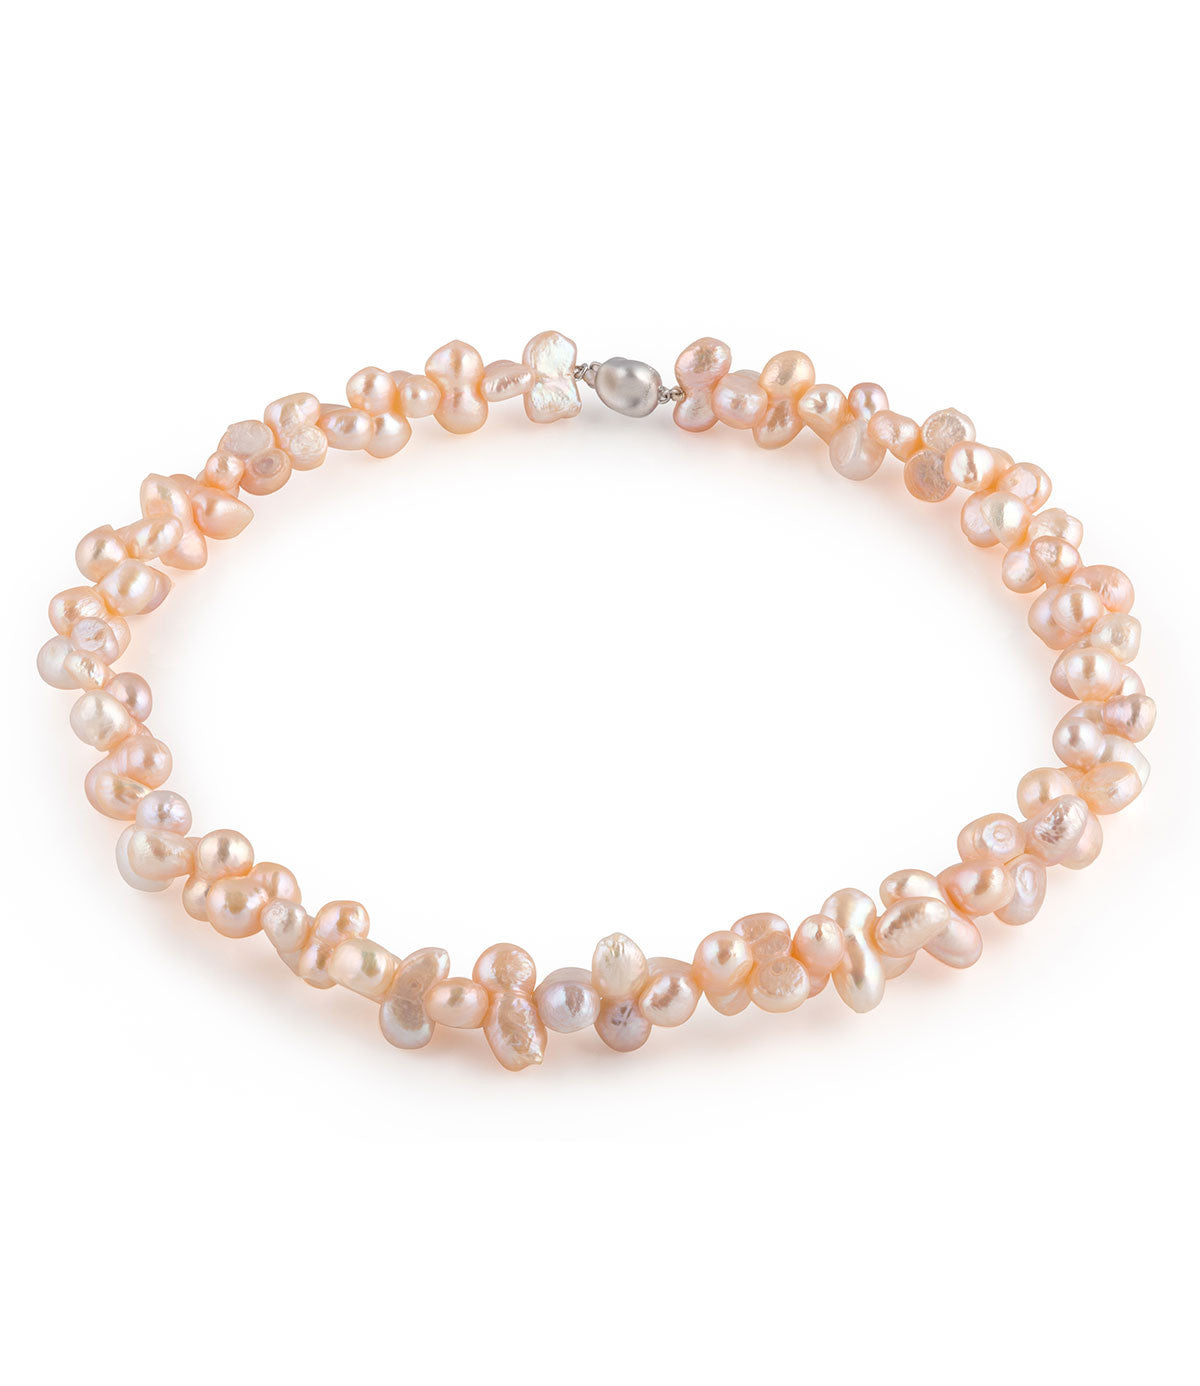 Baroque Pearl Necklace Sterling Silver Freshwater Peach